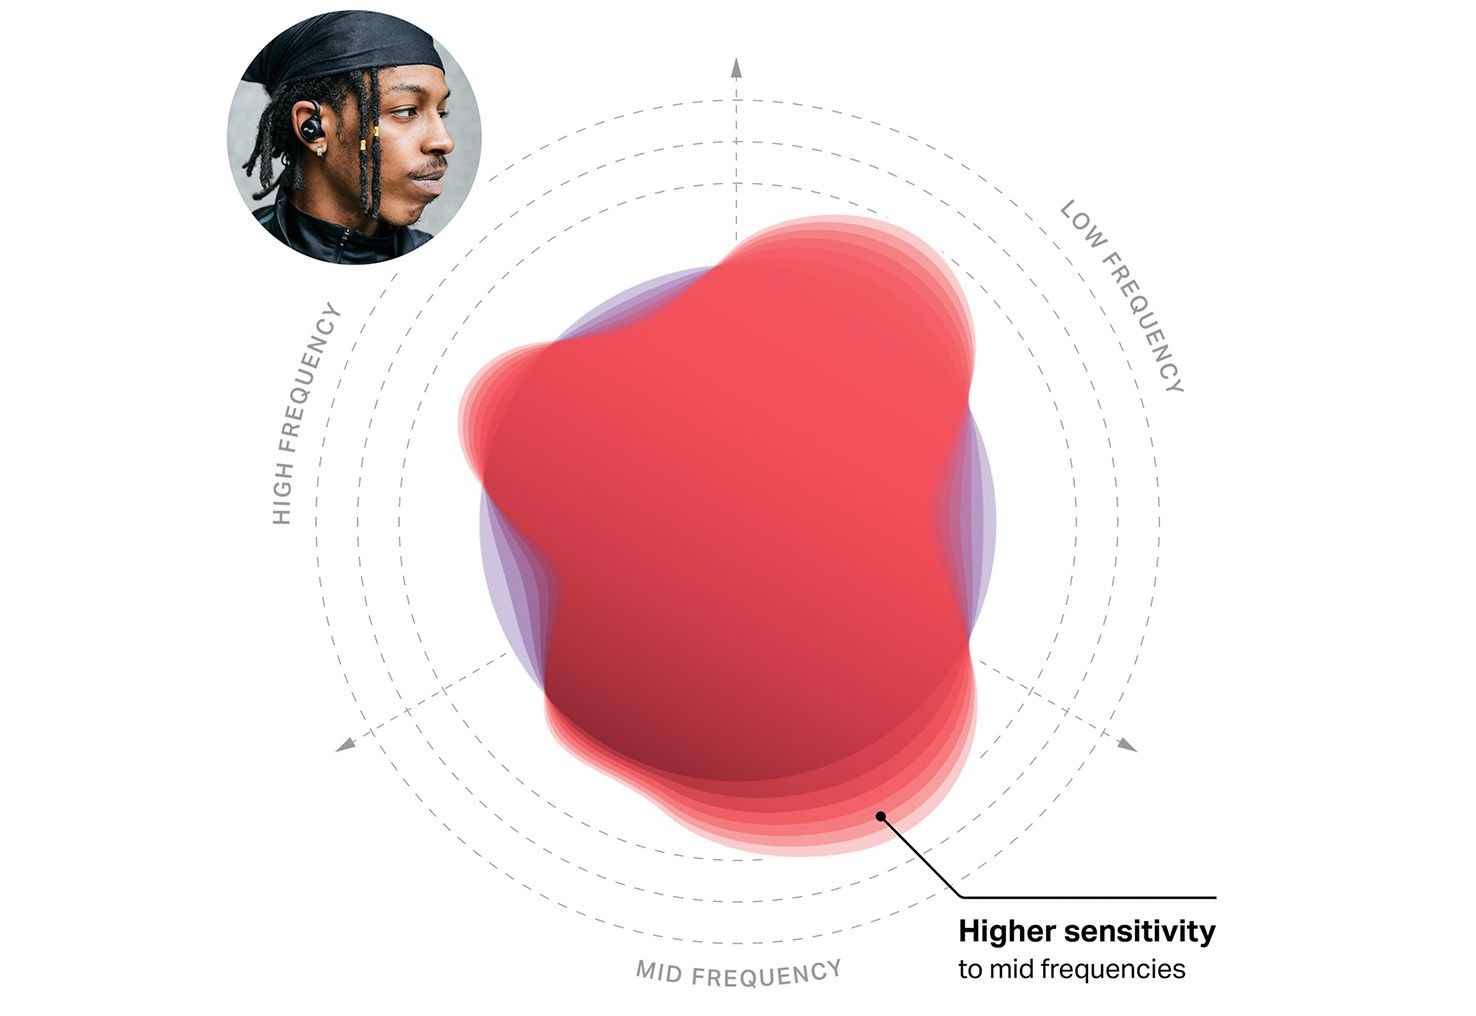 Nura hearing profile mapped on a frequency-sensitivity graph